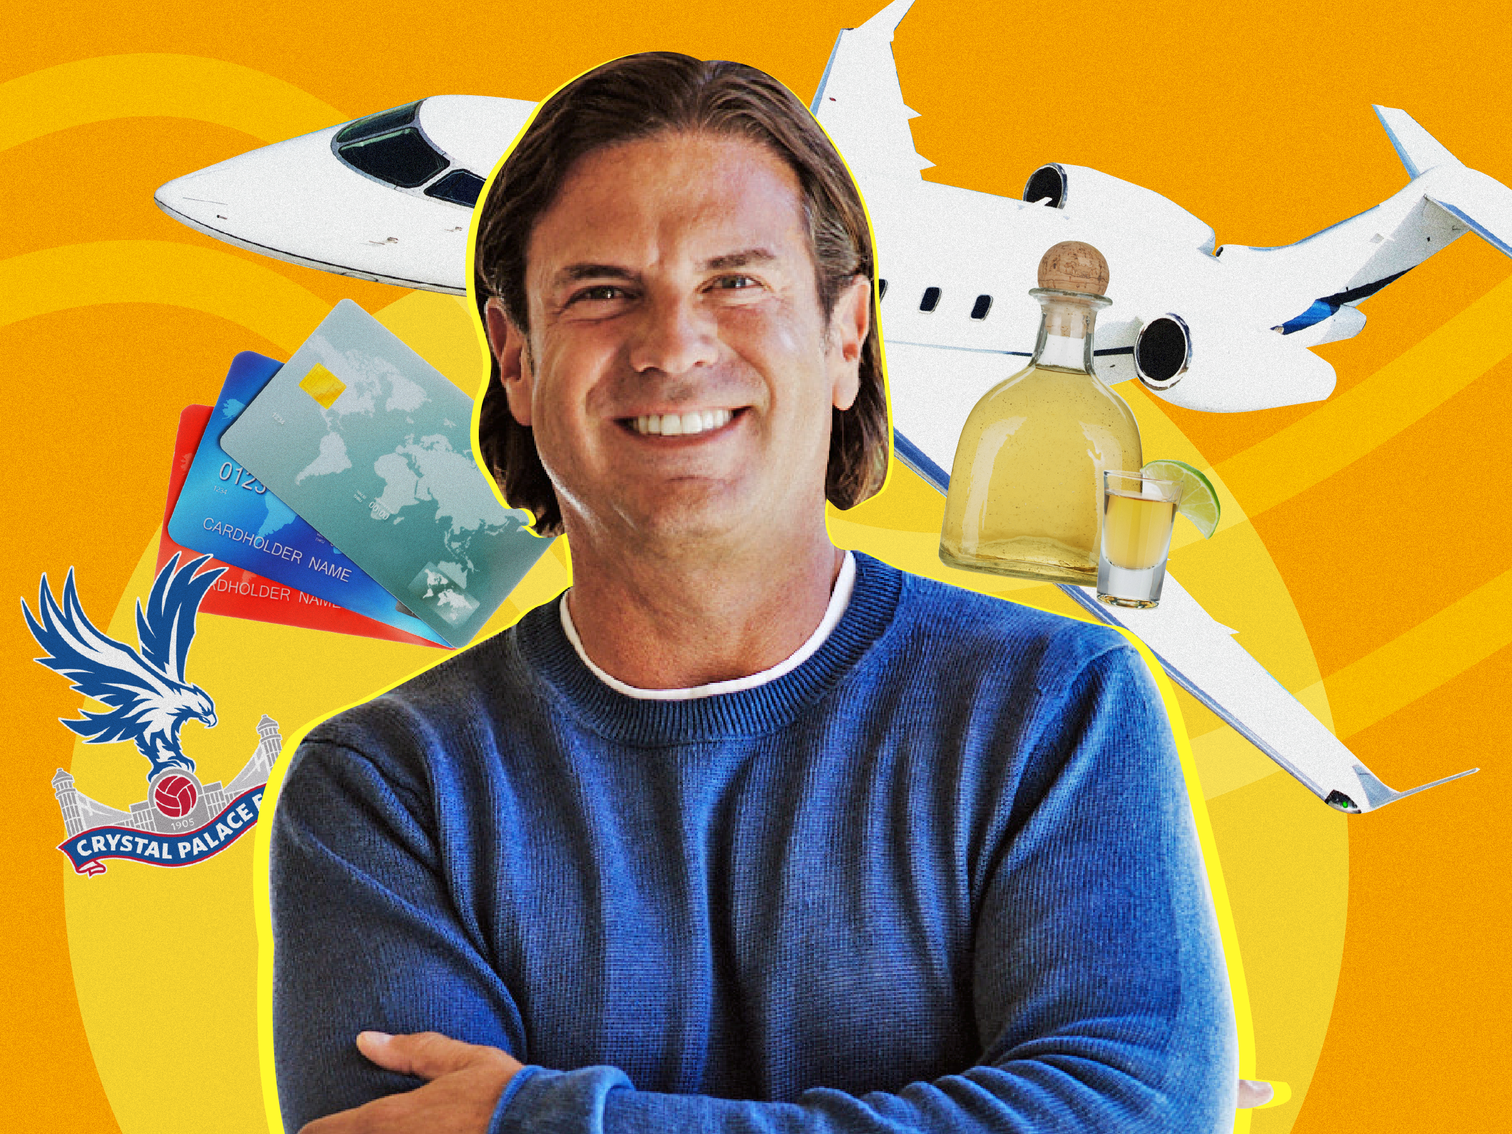 Headshot of David Adelman against an orange background that features a private jet, tequila, credit cards and the Crystal Palace FC logo